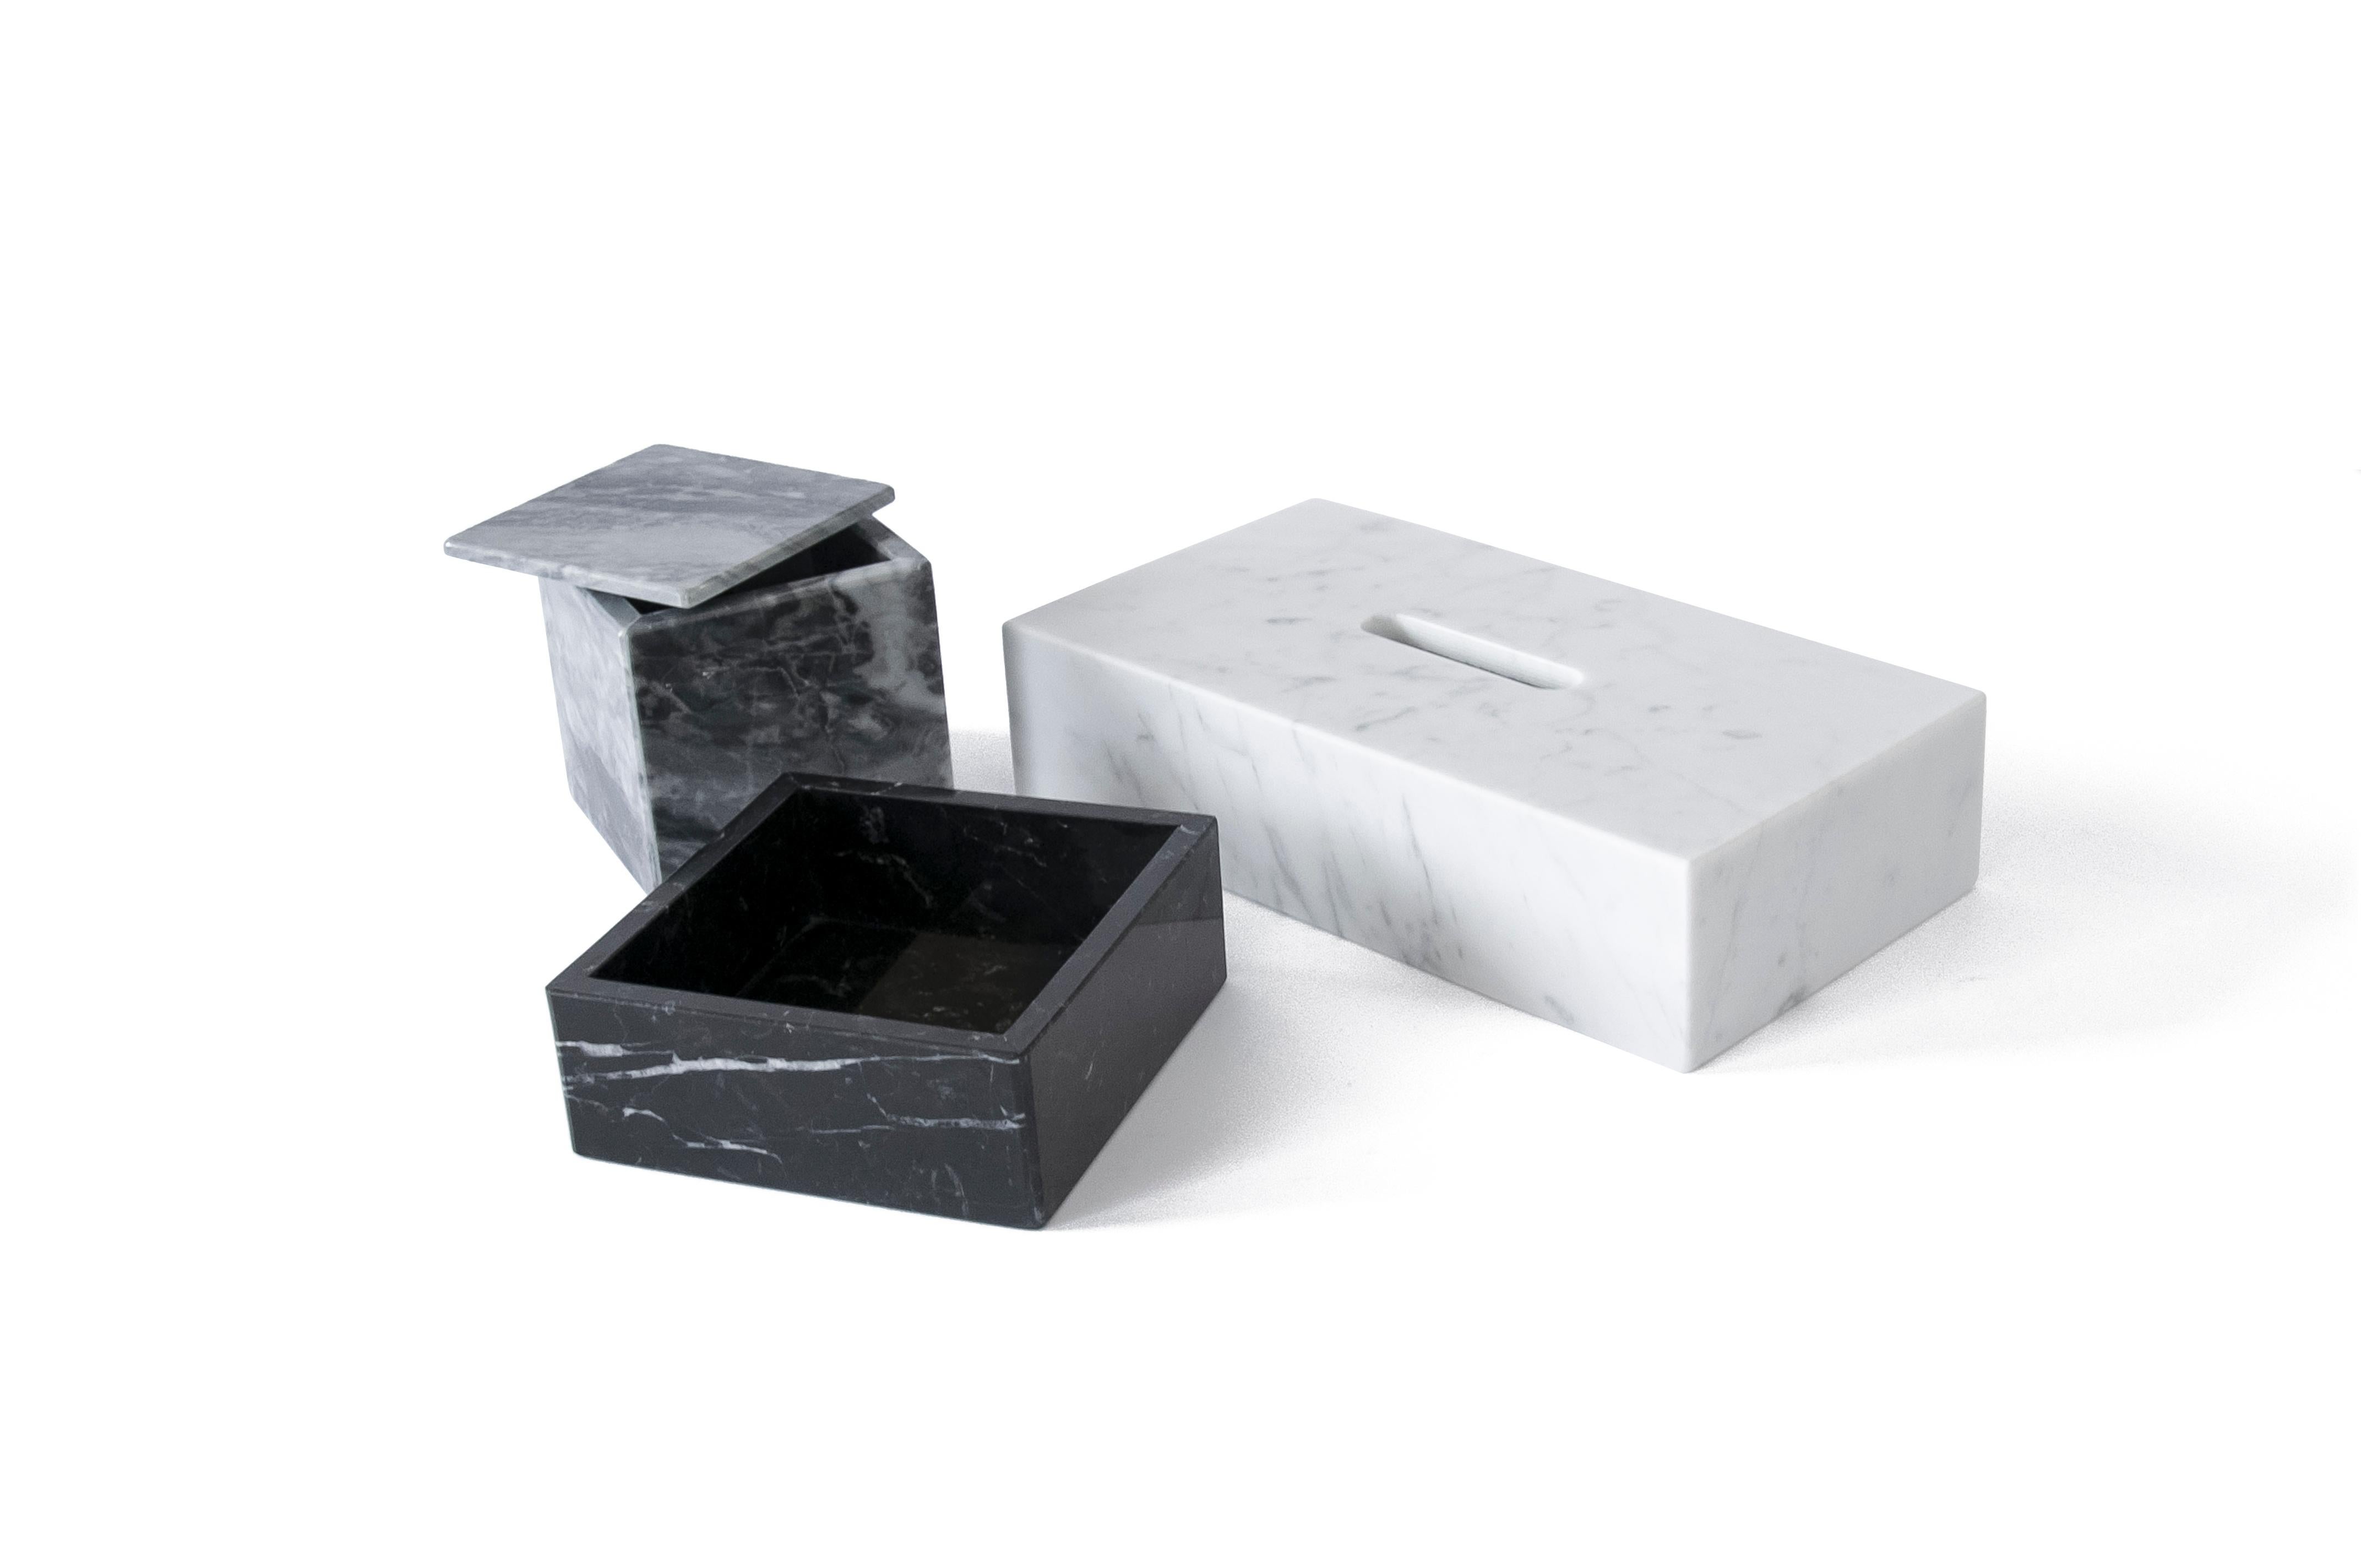 Set composed by one rectangular tissues box in white Carrara marble (14x26x6cm), one box holder with lid in grey Bardiglio marble (9,5x9,5x9,5cm) and one cotton box in black Marquina marble (13x13,5x5cm) 

Product weight (excluding shipping): gr